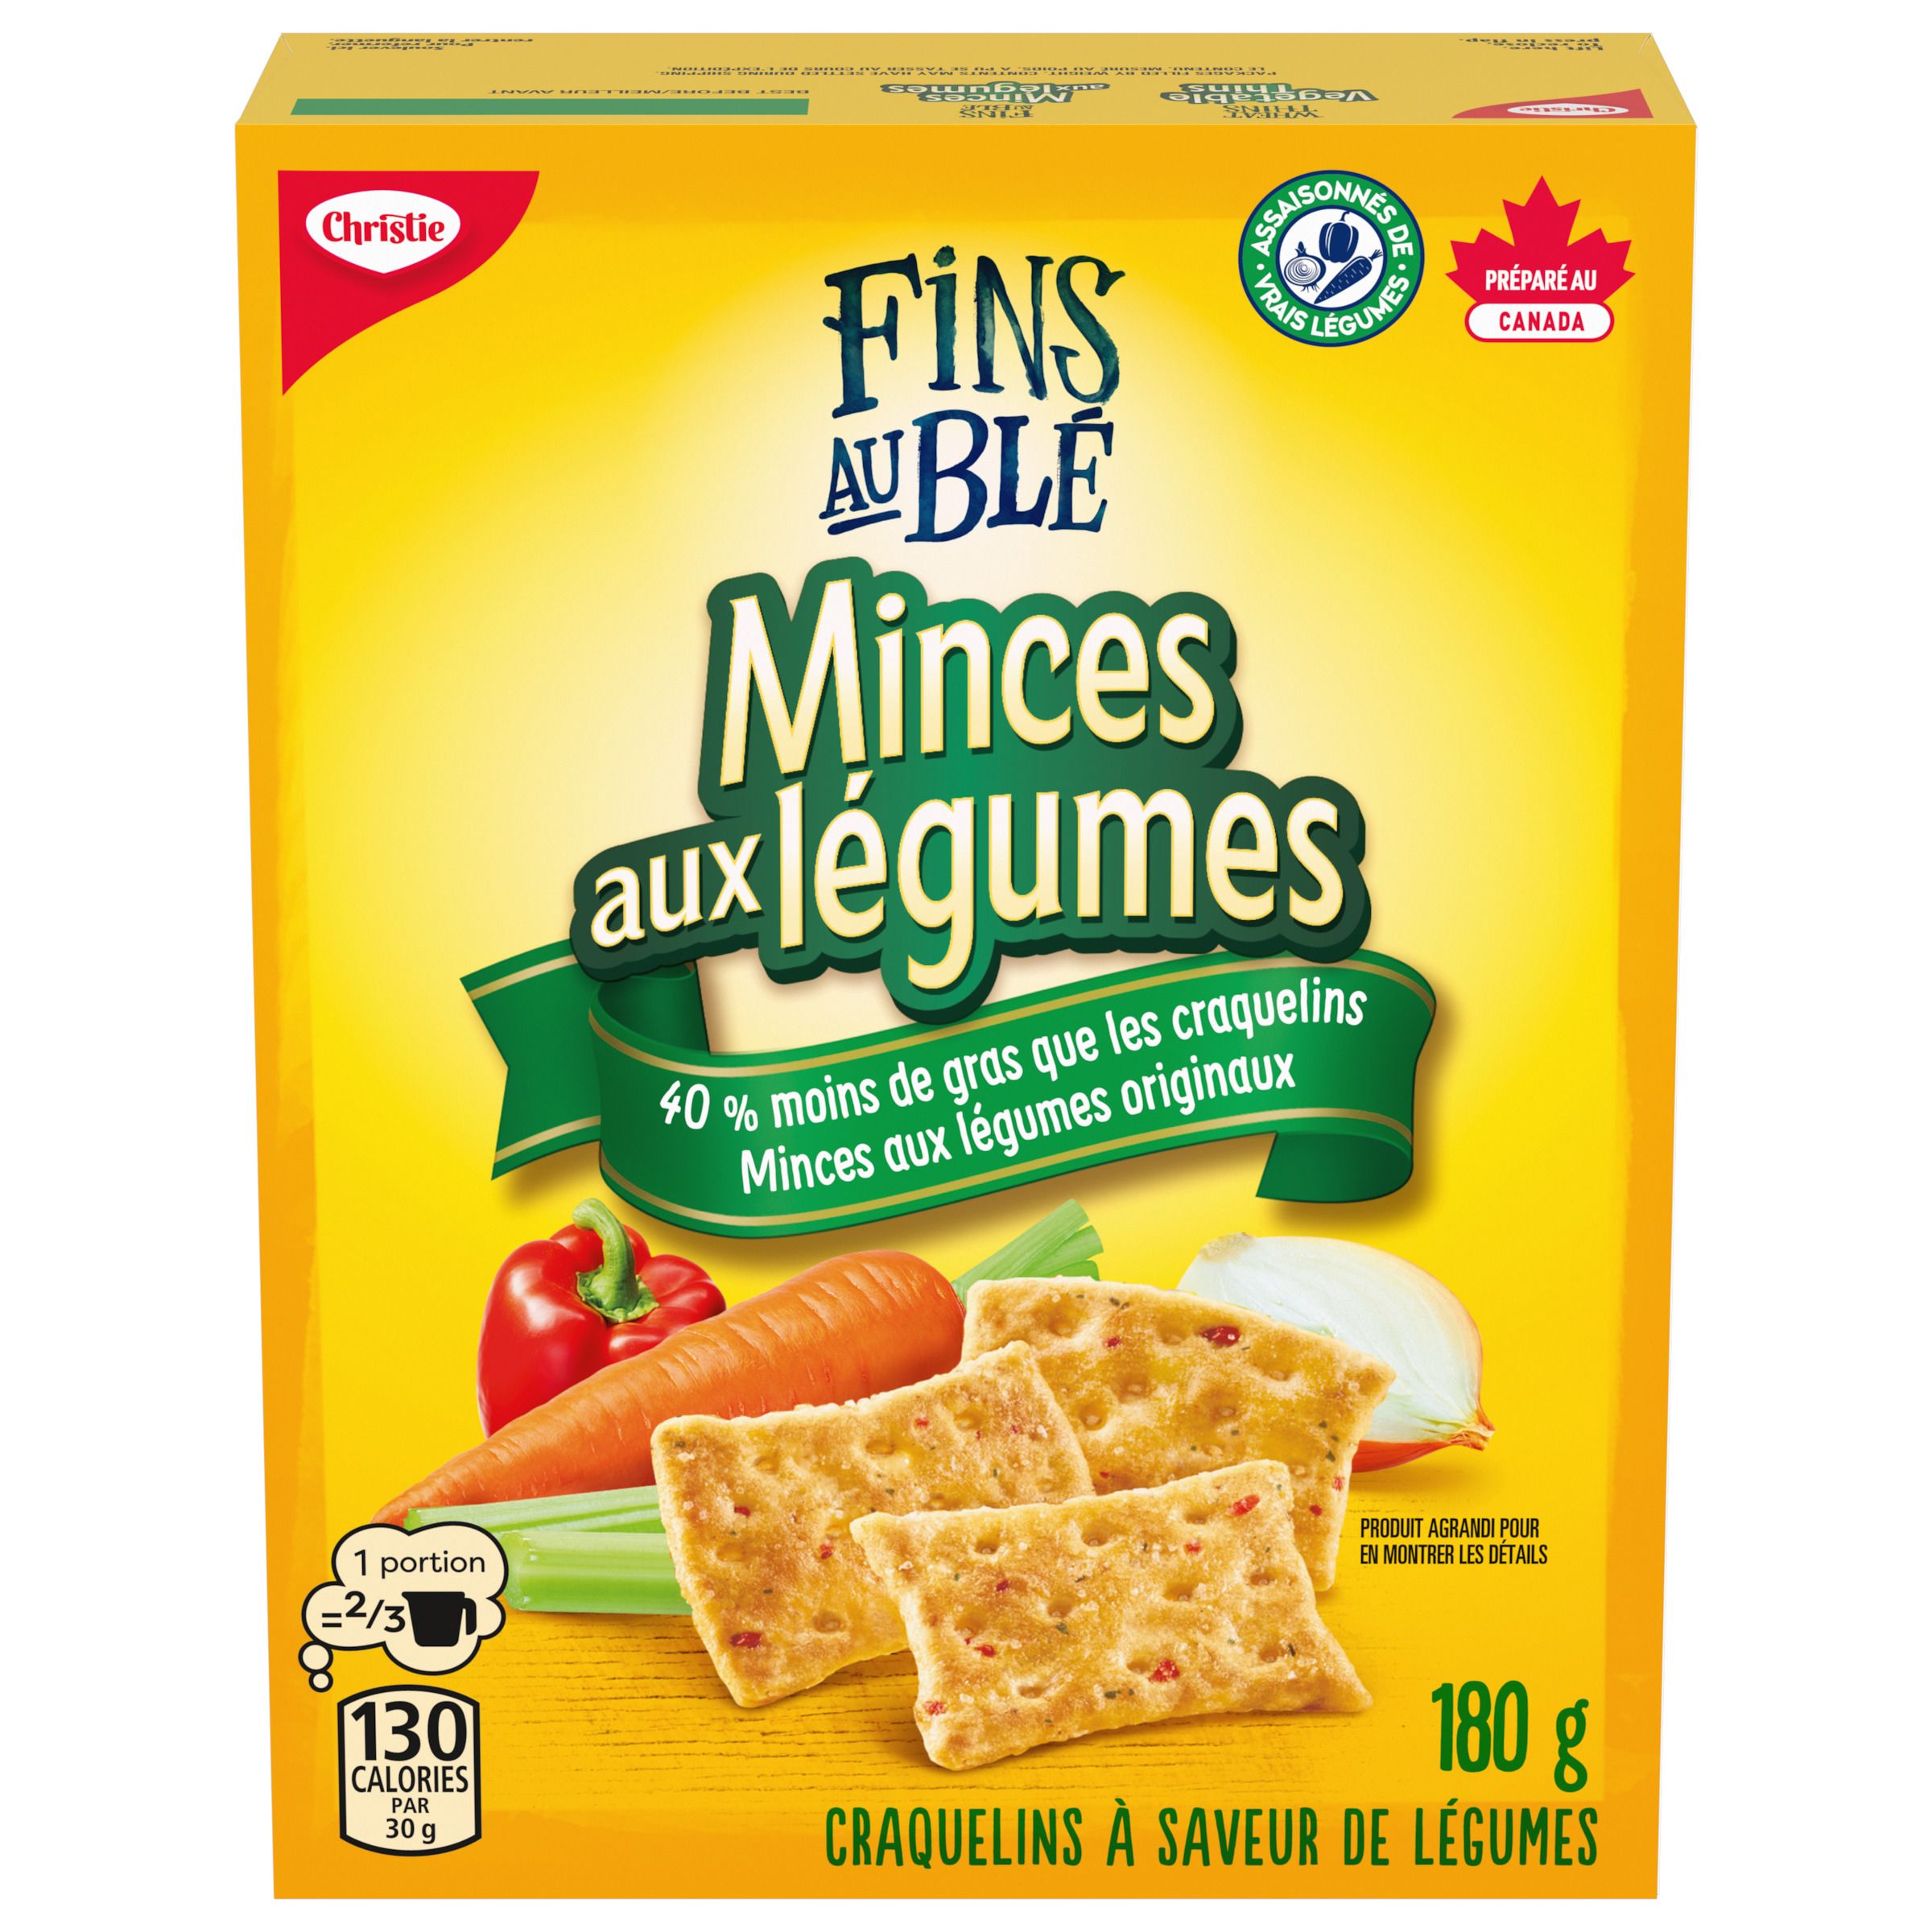 Wheat Thins Vegetable Thins 40% Less Fat Crackers 200 G-1